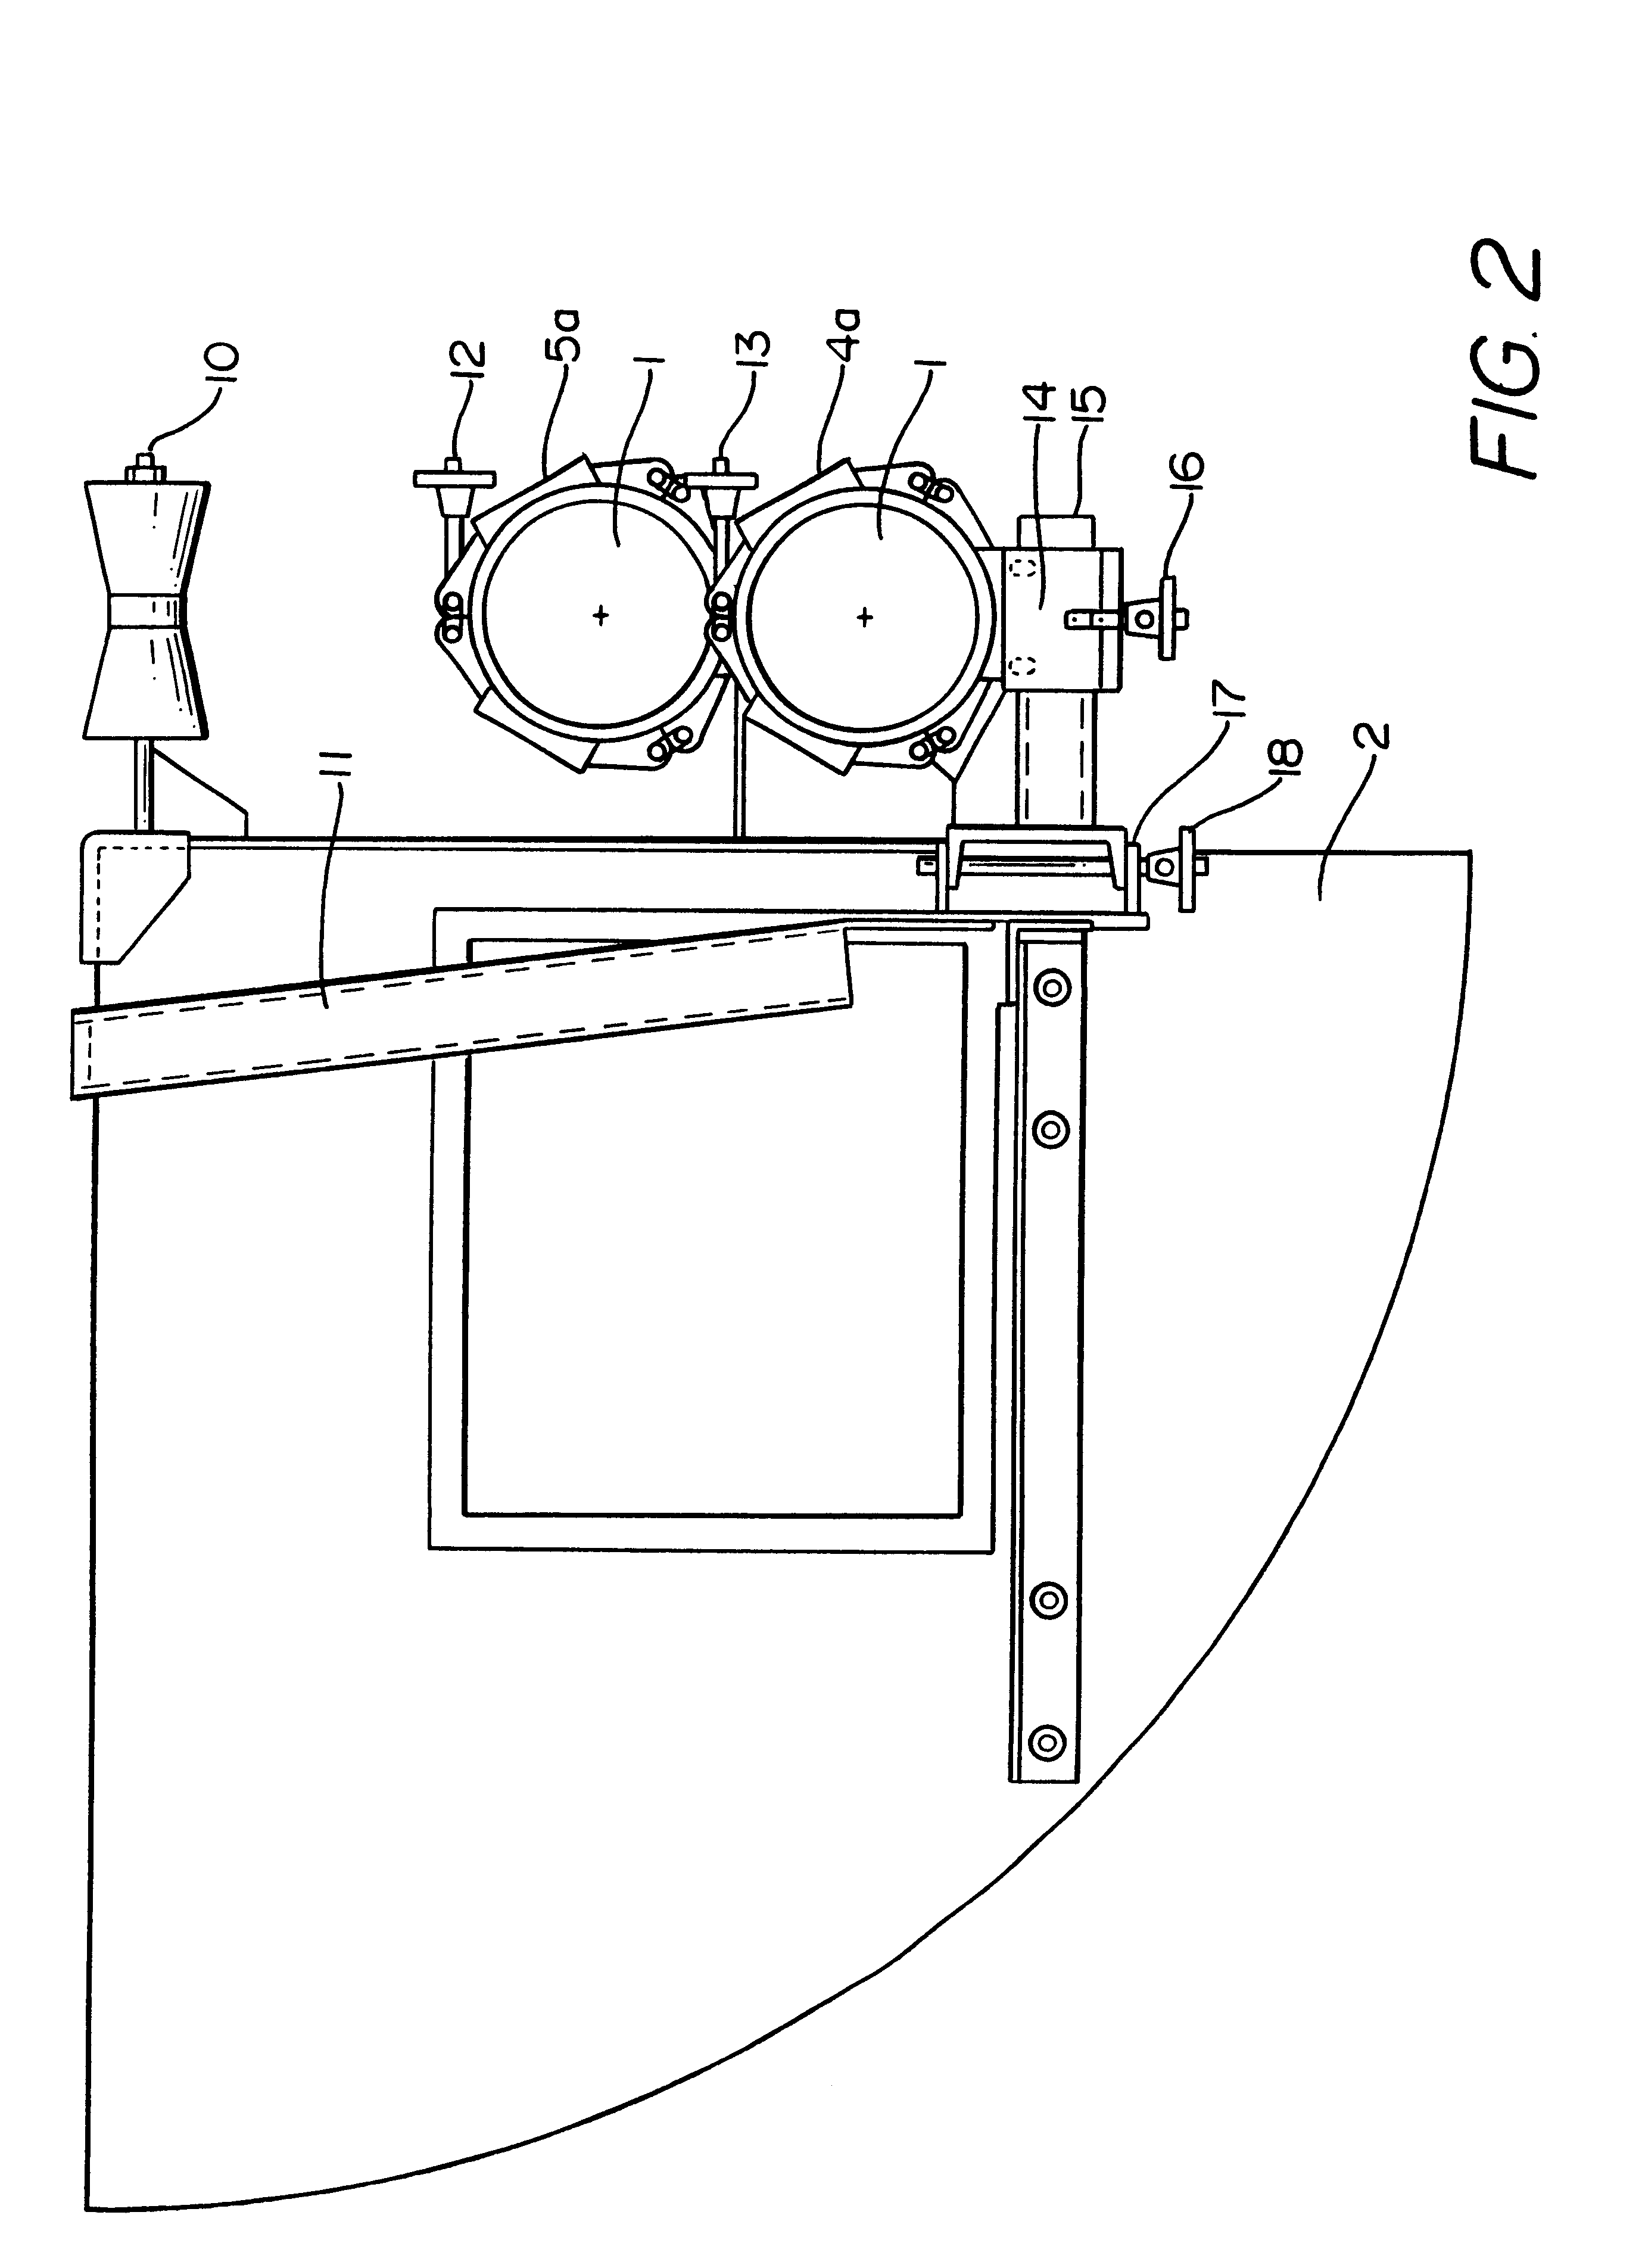 Mast mounting system and method